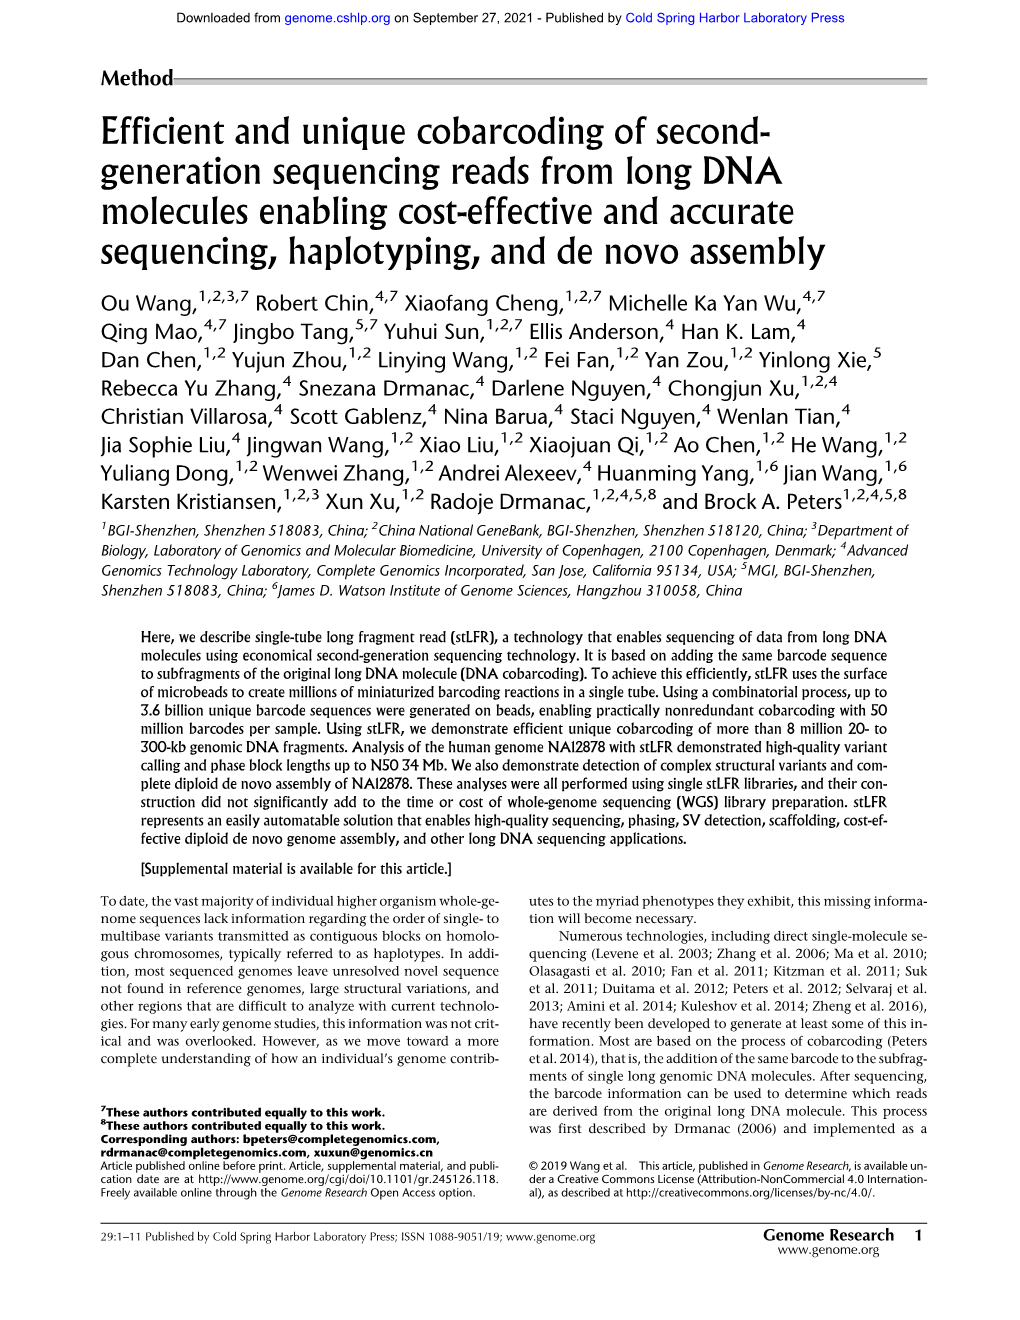 Efficient and Unique Cobarcoding of Second-Generation Sequencing